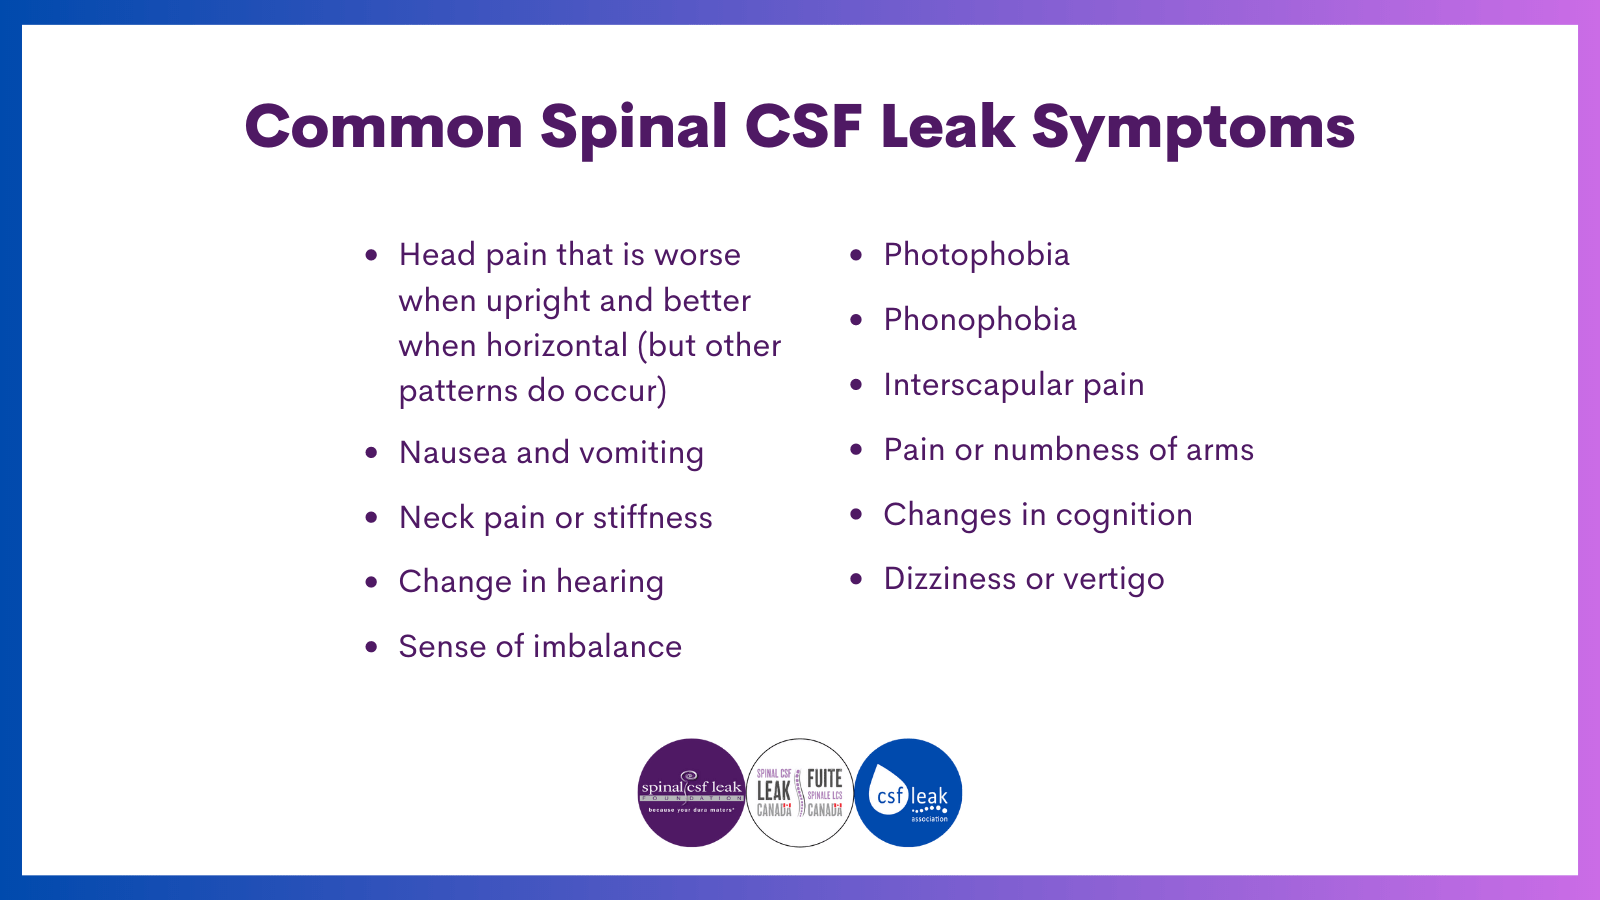 How do I know if I have a spinal CSF leak?